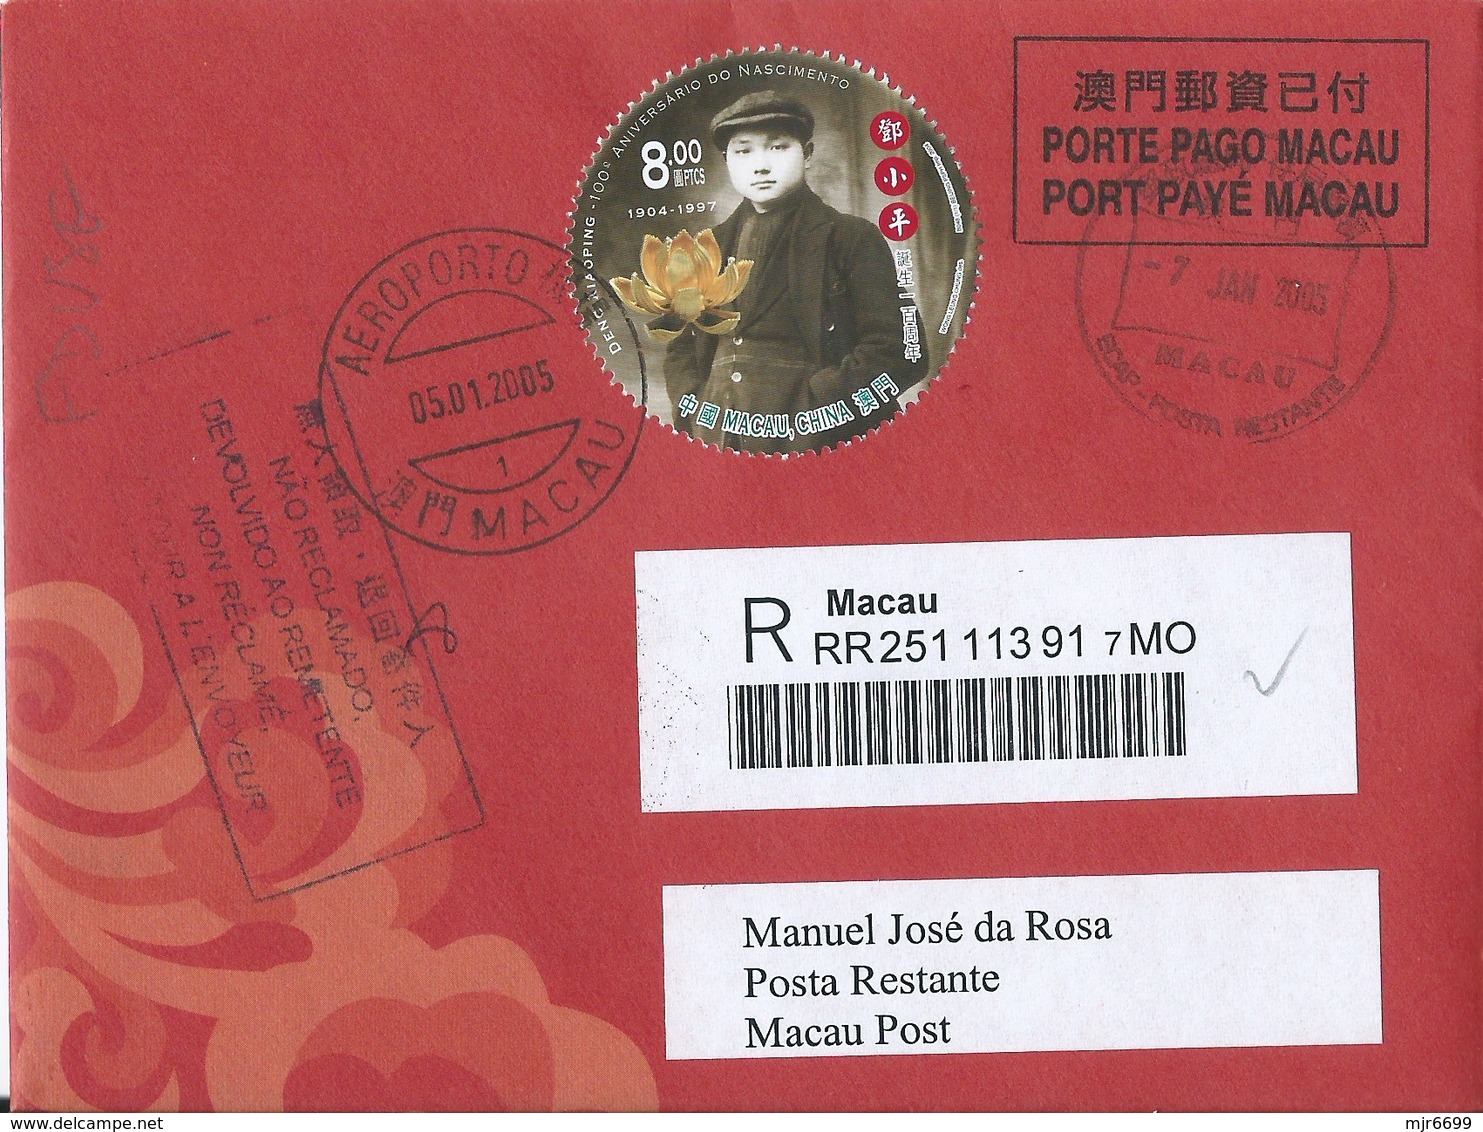 MACAU 2005 LUNAR NEW YEAR OF THE COCK GREETING CARD & POSTAGE PAID REG COVER 1ST DAY LOCAL USAGE - Ganzsachen